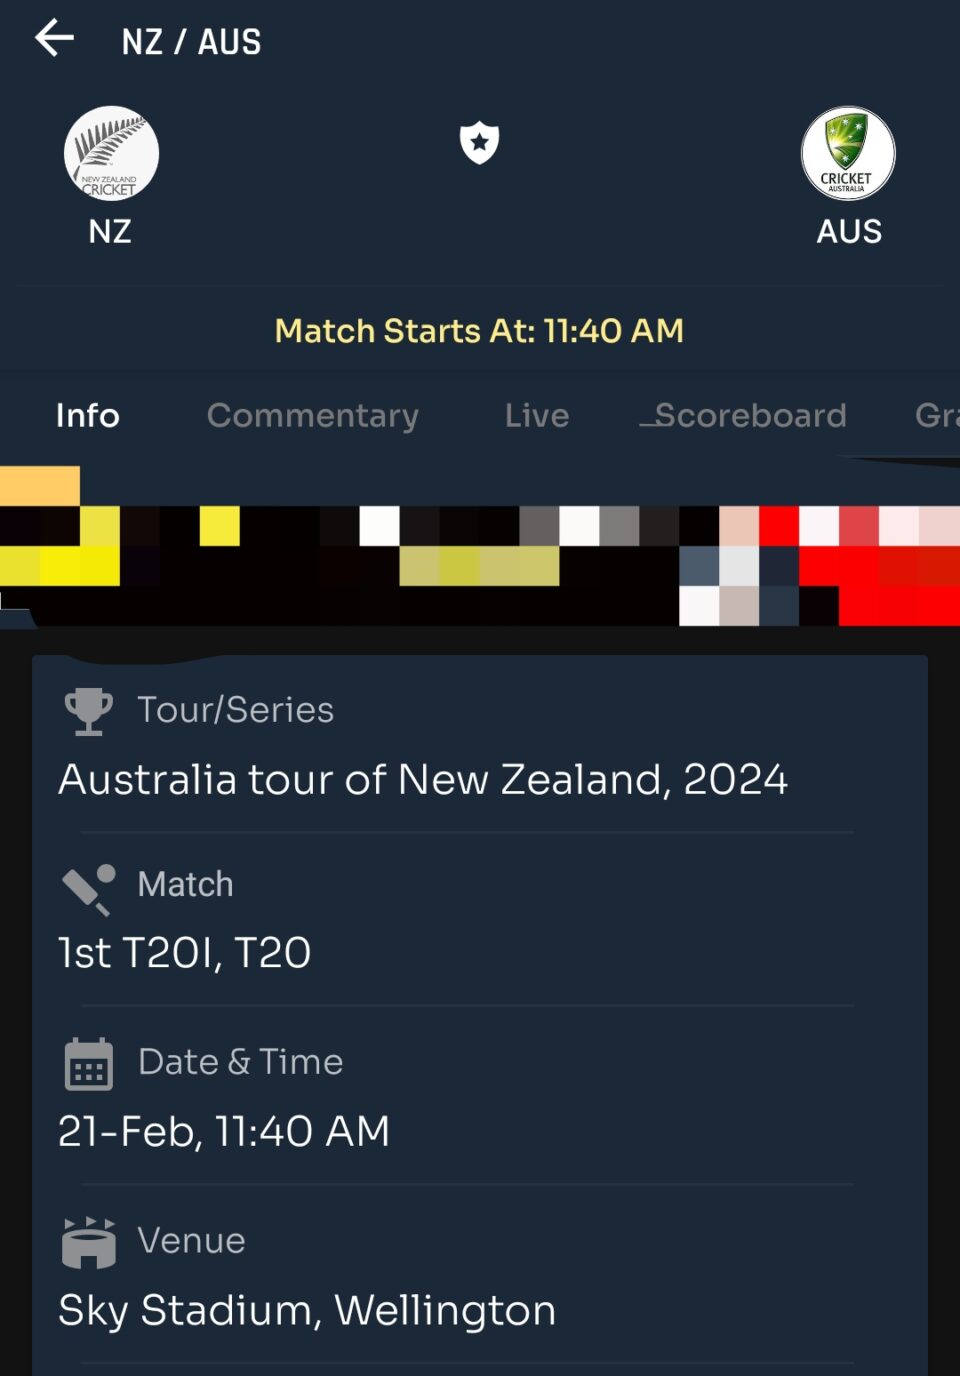 1st T20 Match and Toss Prediction |AUS vs NZ|Toss and Match Analysis | Pitch & Weather Report | Probable 11